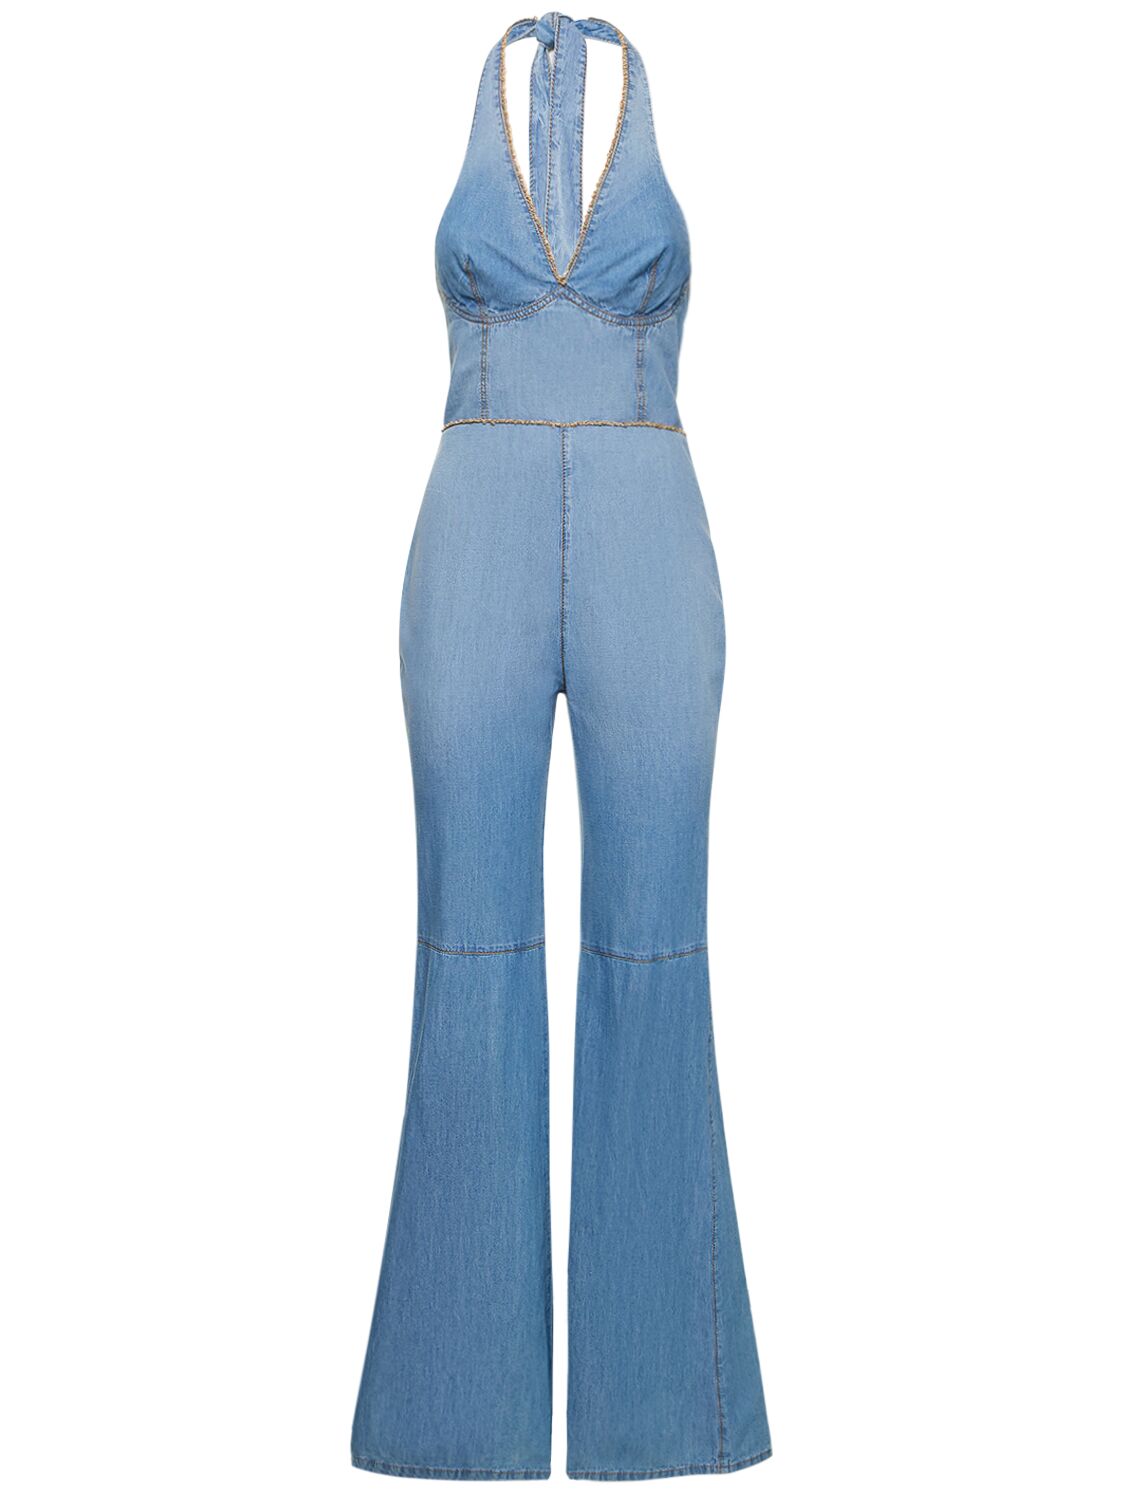 Image of Embroidered Halter Neck Cotton Jumpsuit